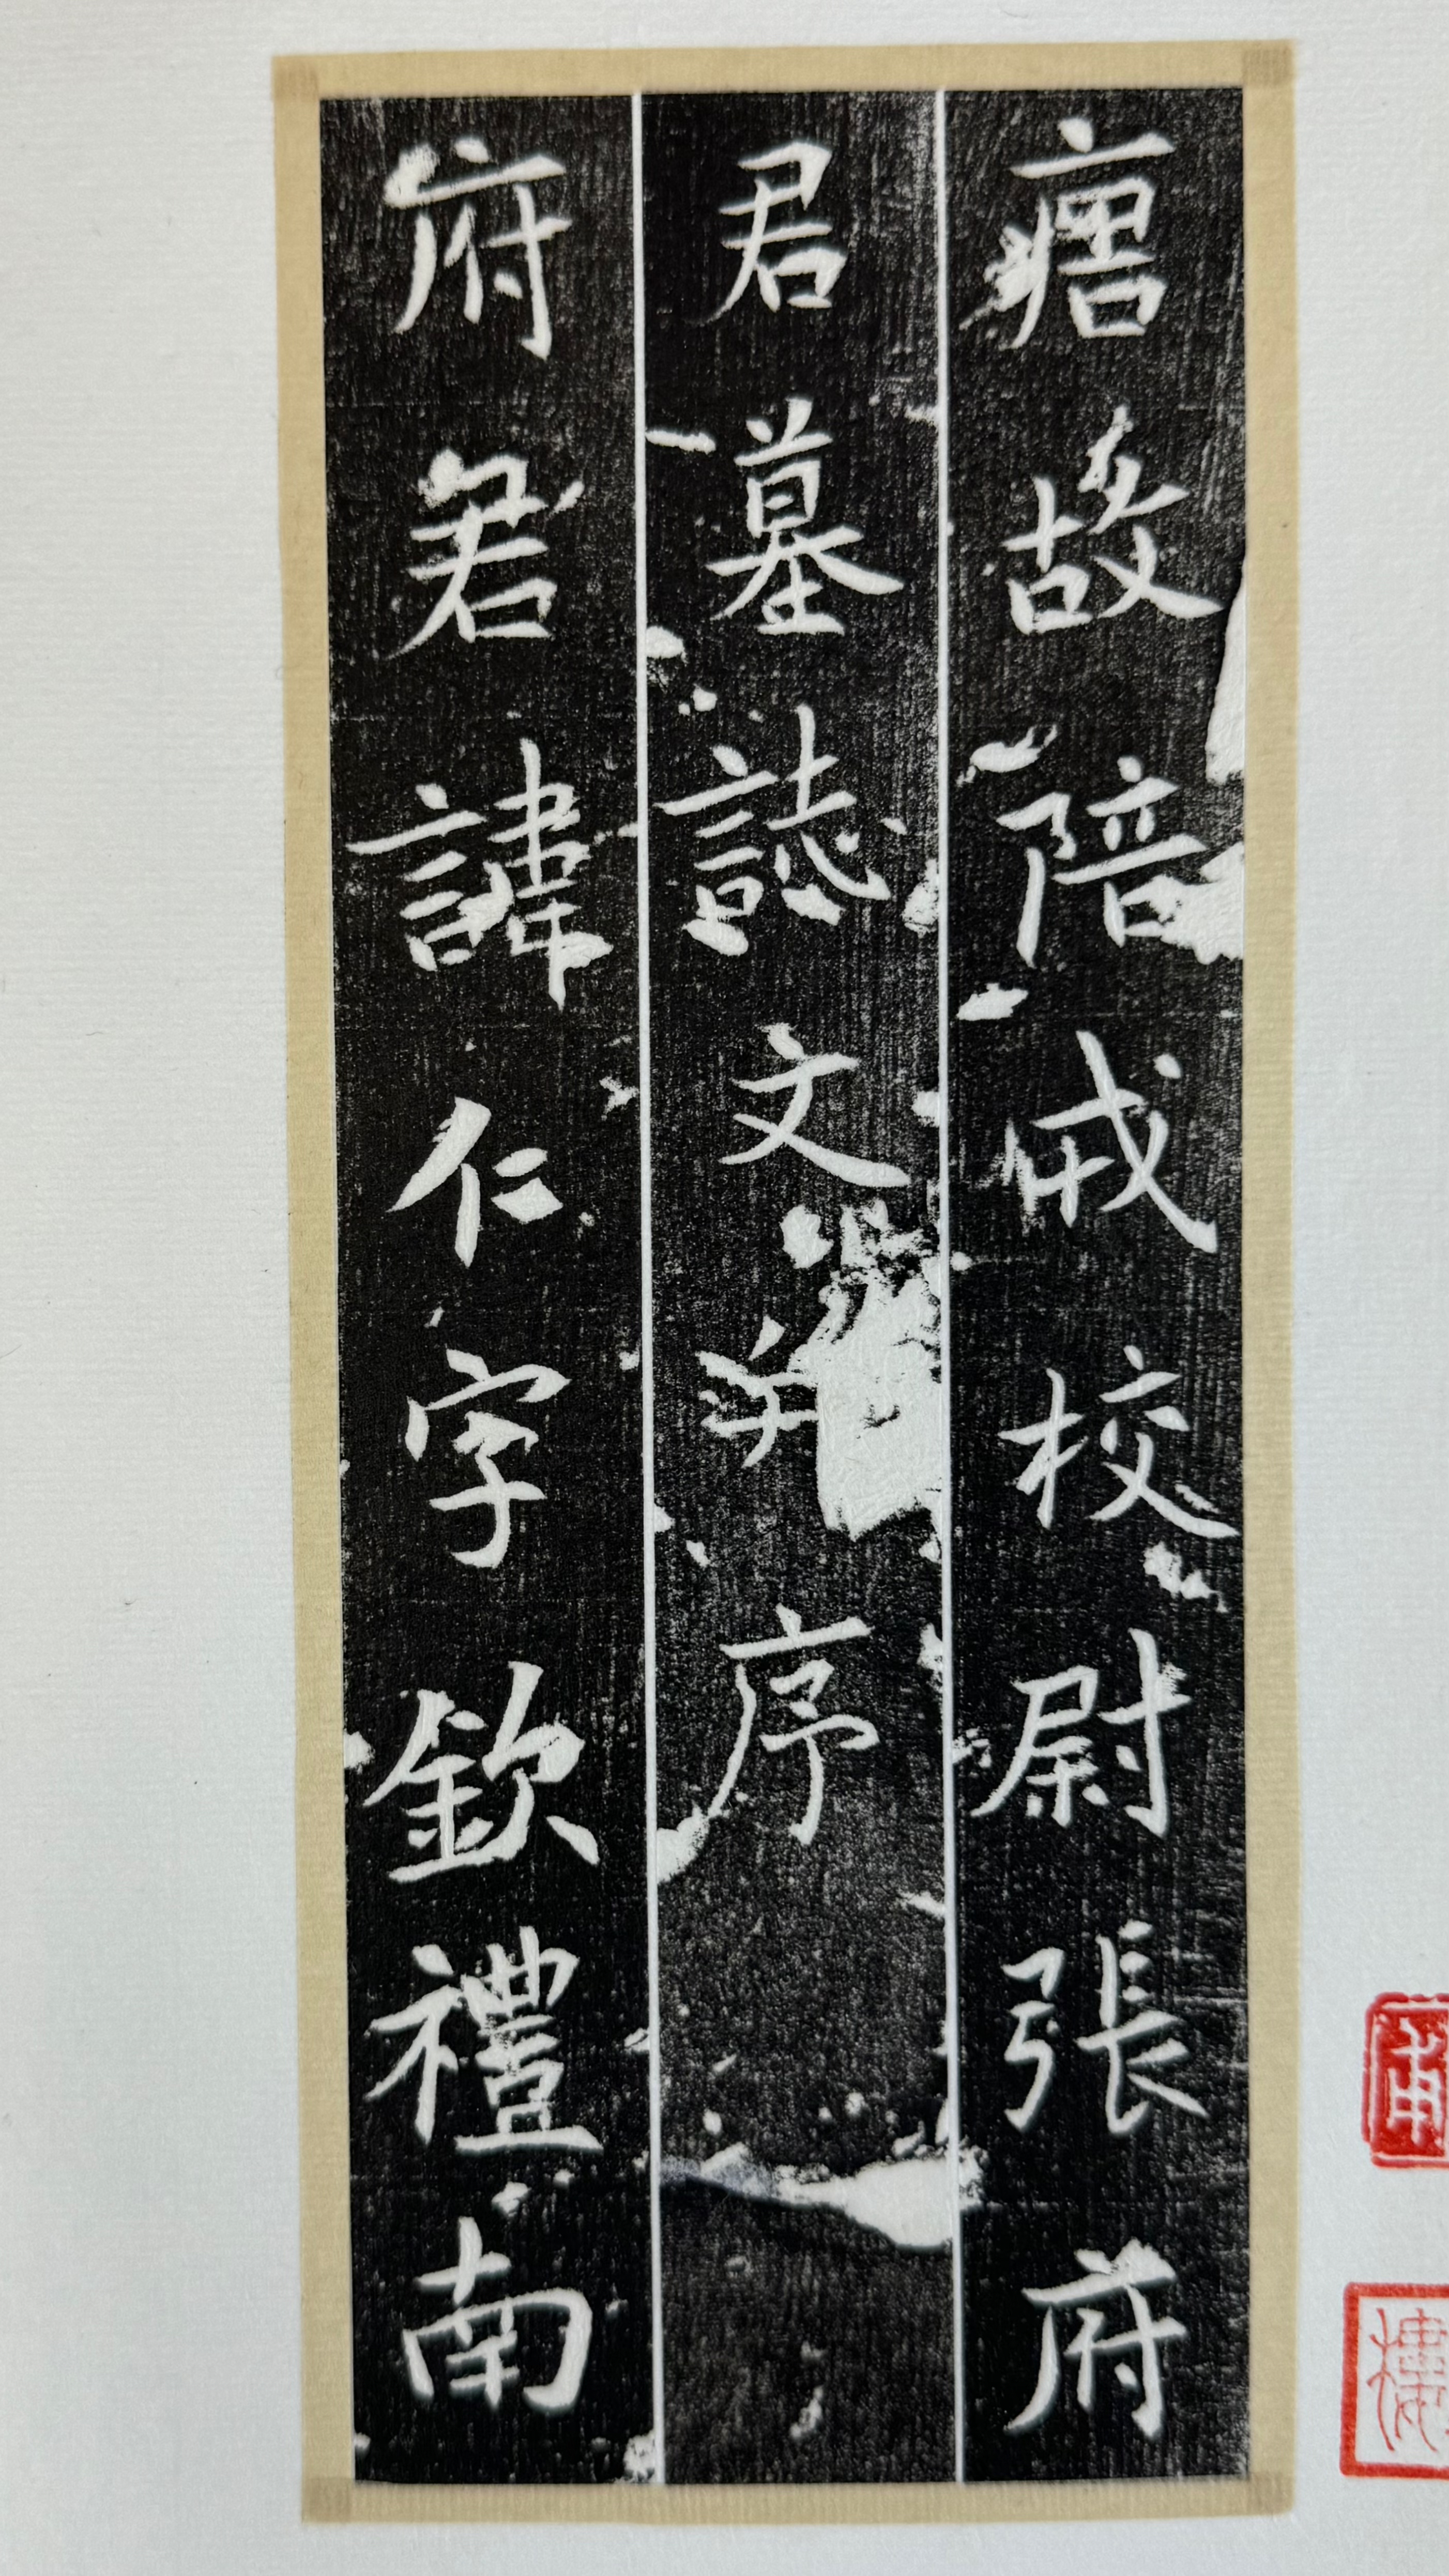 Two Chinese Calligraphy Rubbing, rubbing of Wu Changshuo's calligraphy and a rubbing of a tombstone - Image 5 of 6